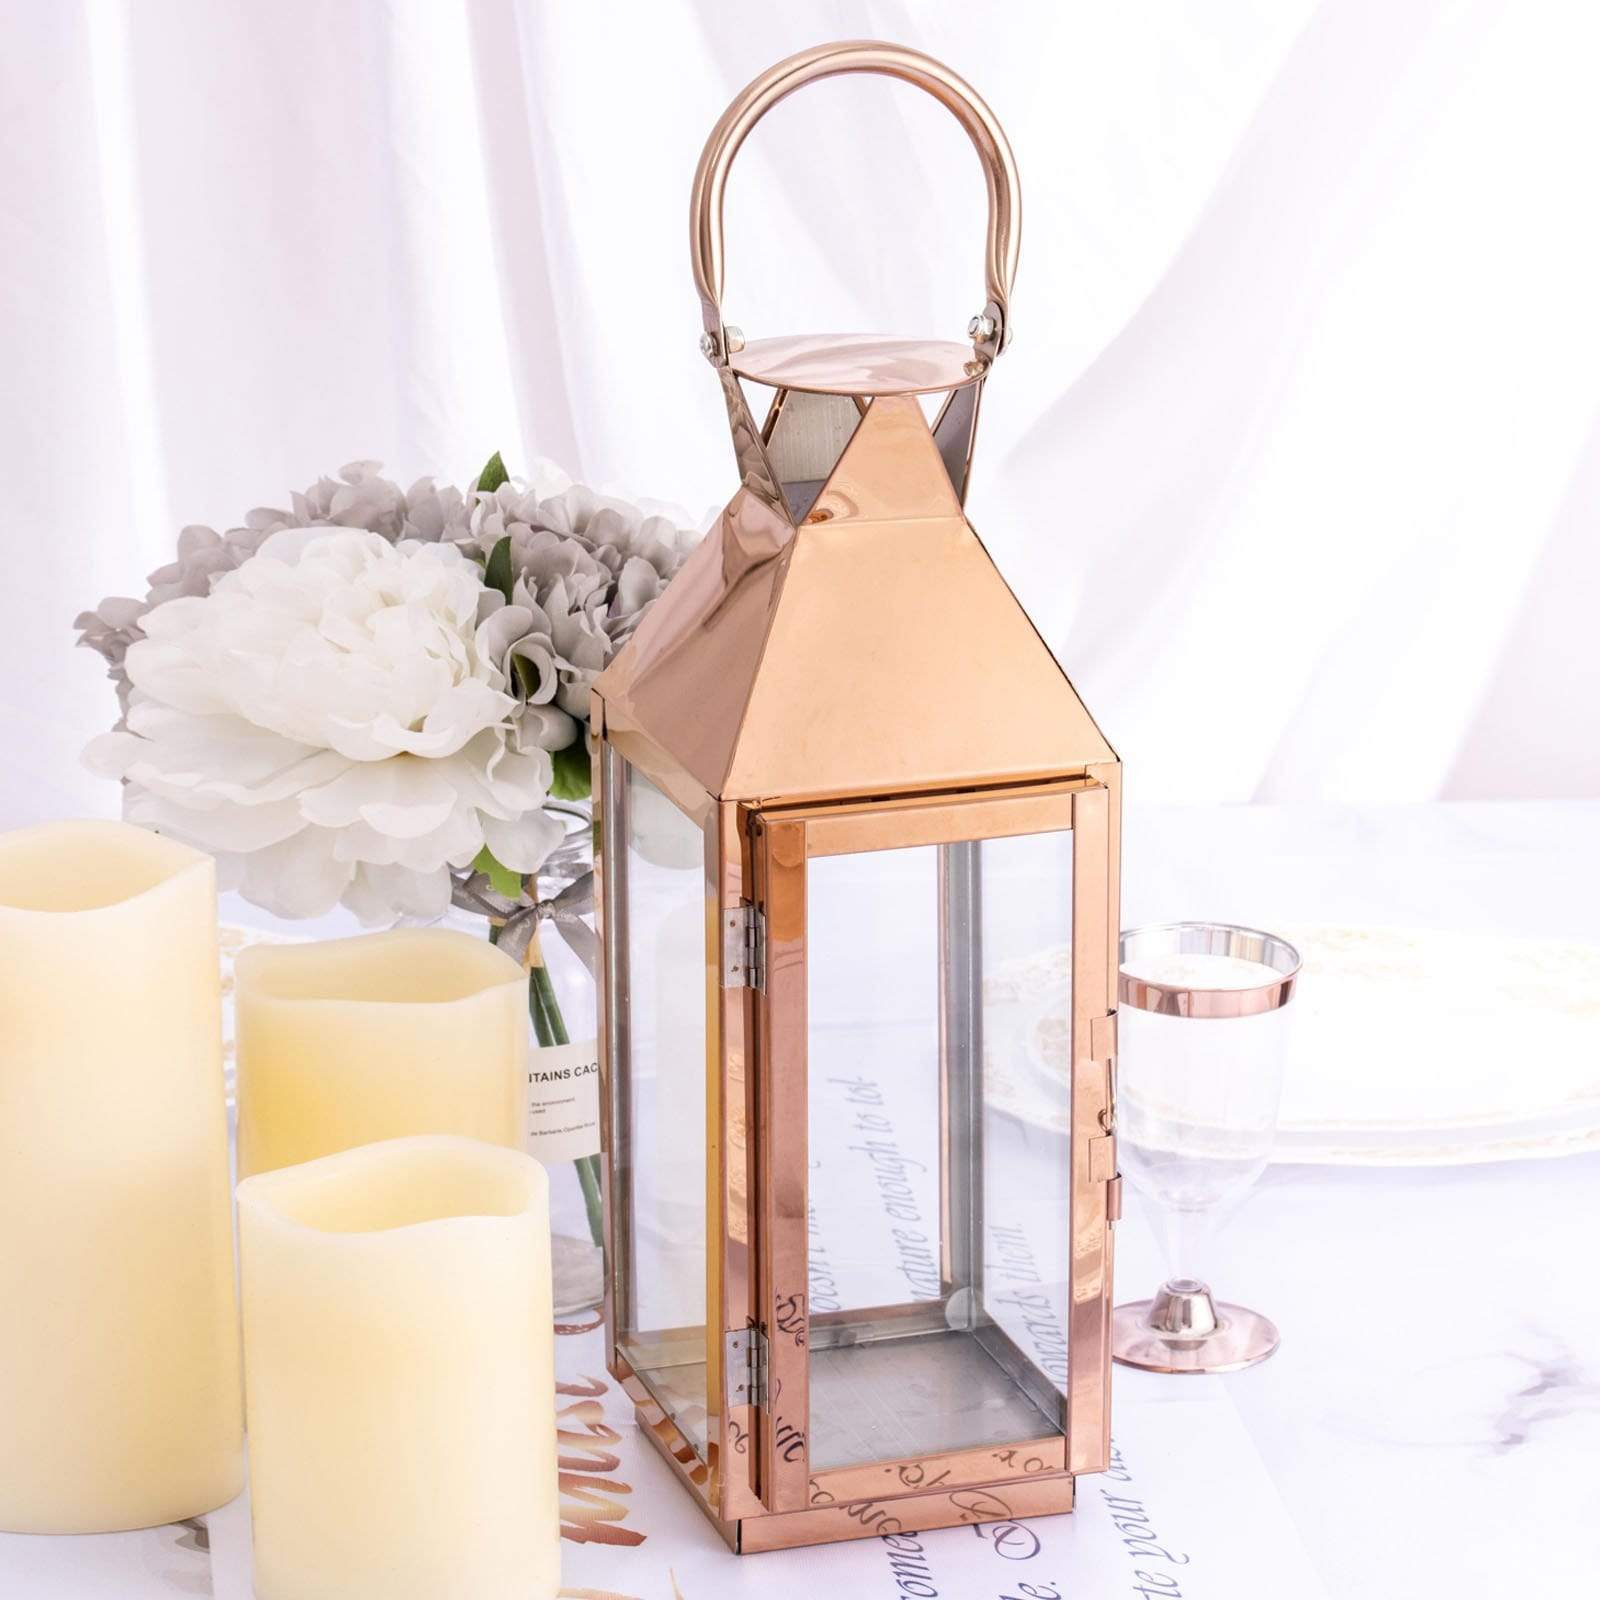 14 in tall Metal Lantern Candle Holder Centerpiece